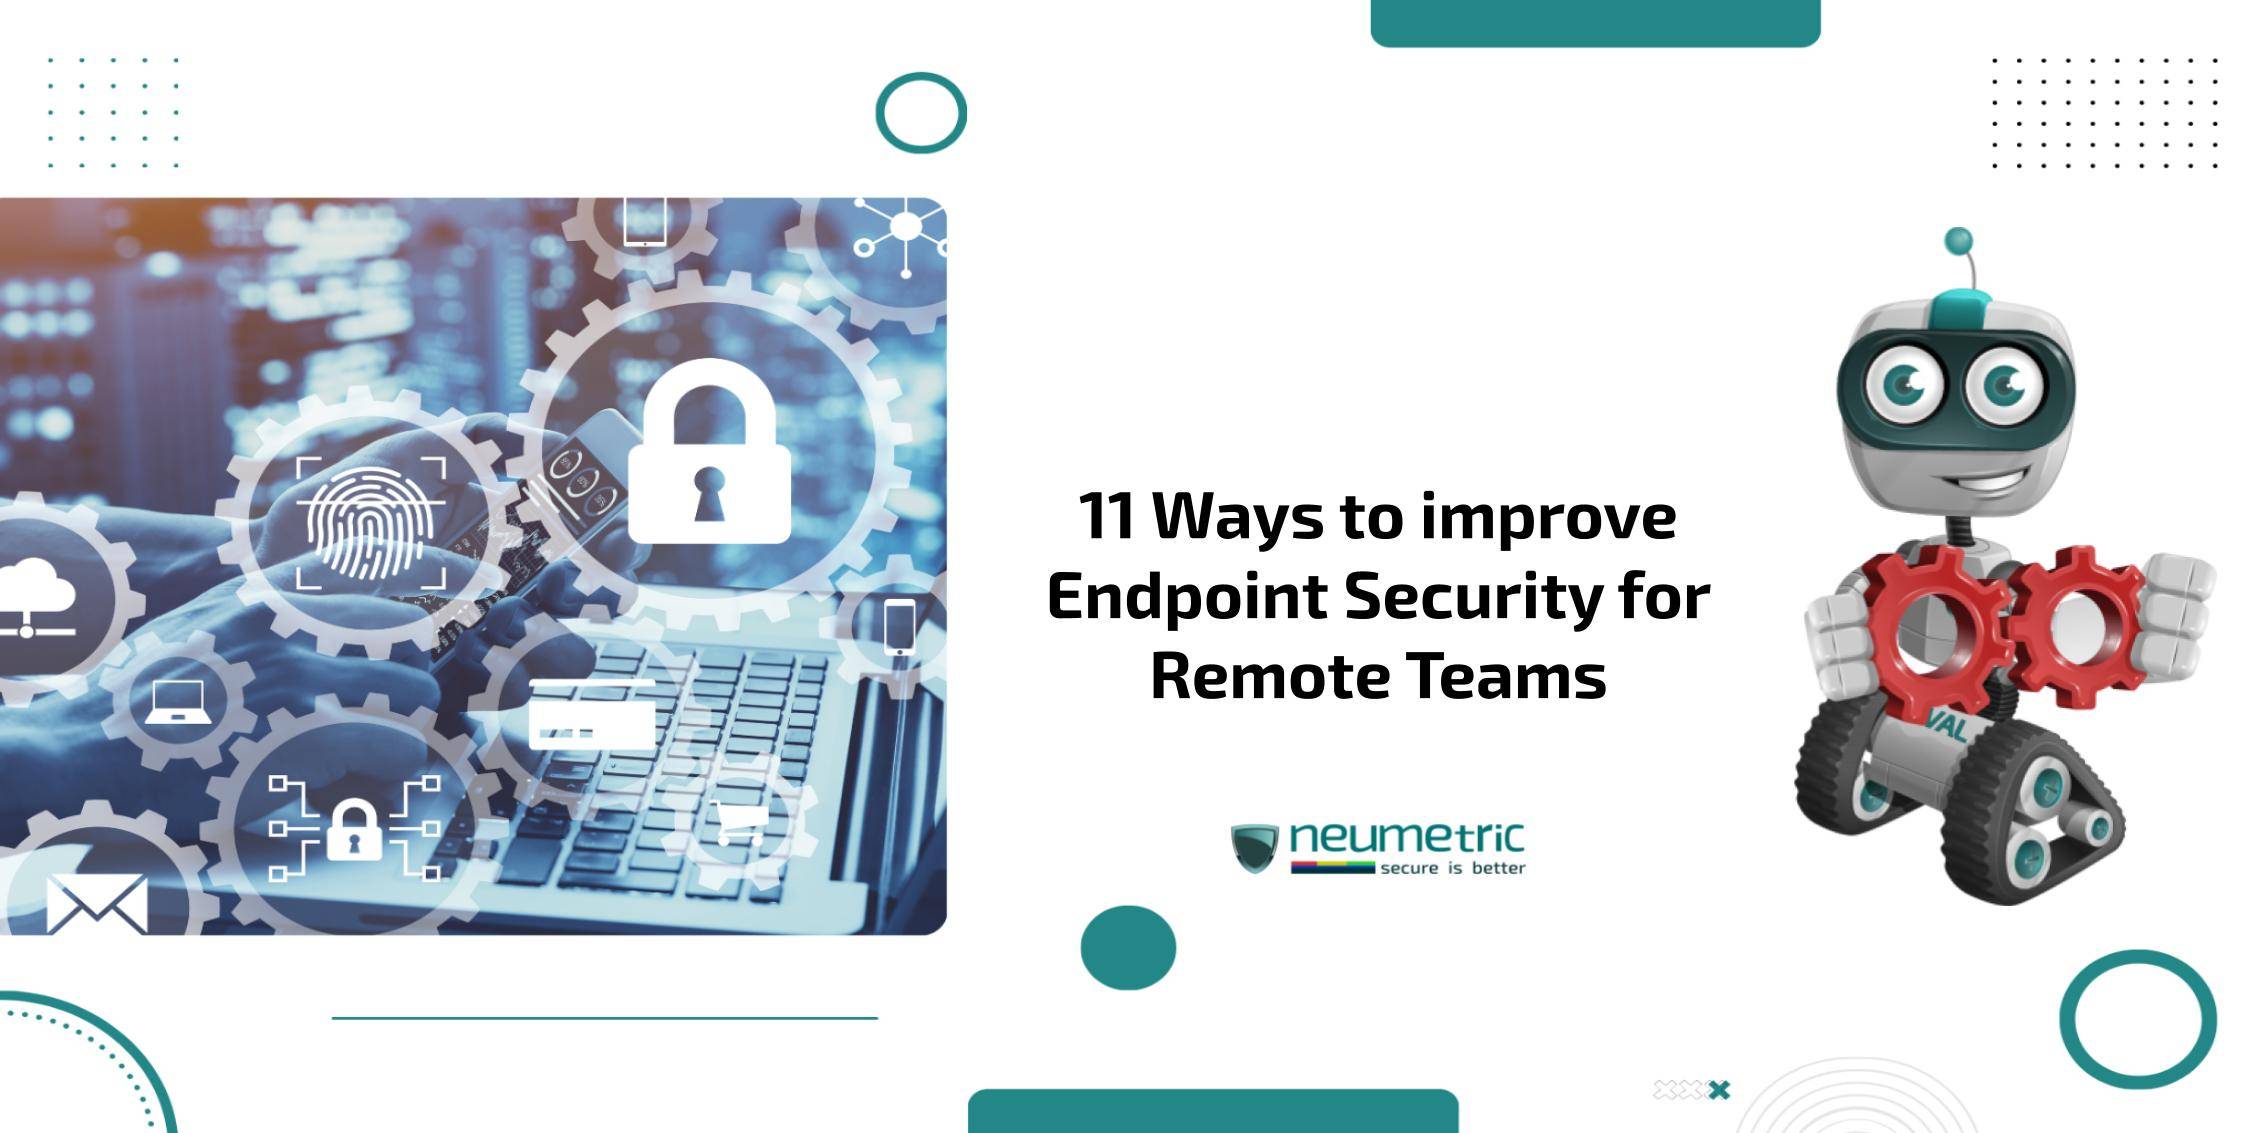 Endpoint security solutions for remote teams